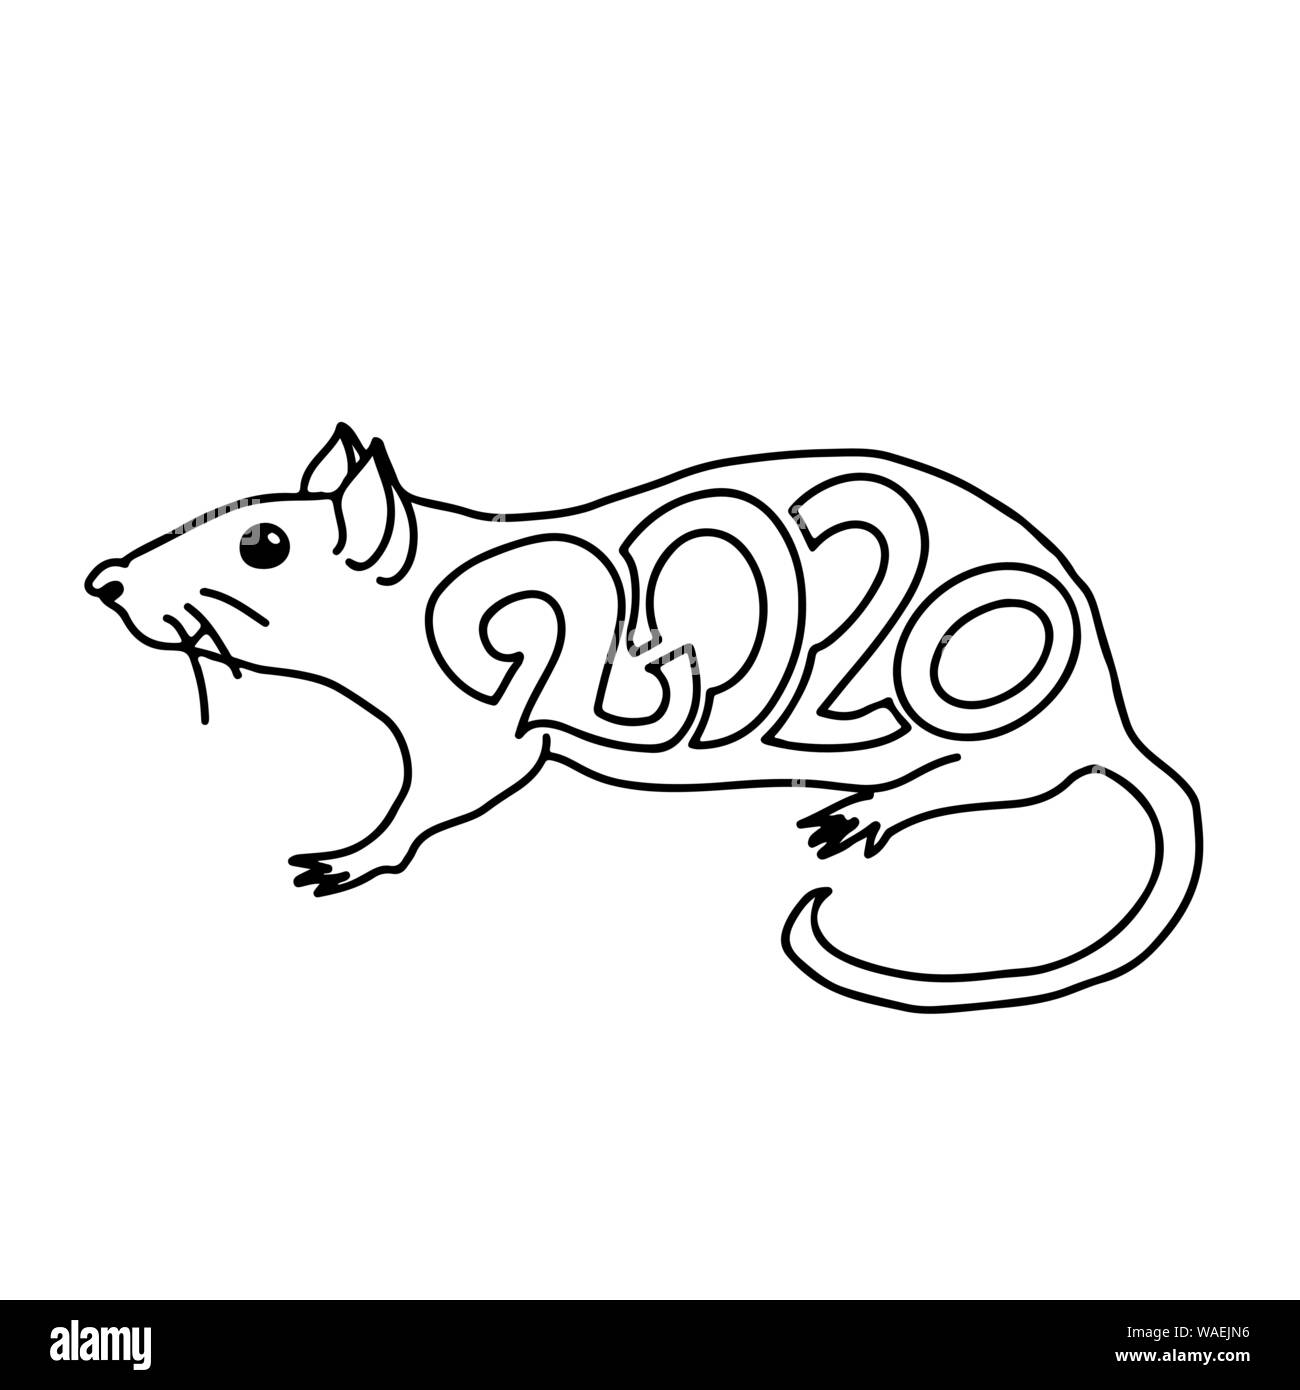 Rat sign. Chinese Happy new year 2020. Black and white holiday sketch ...